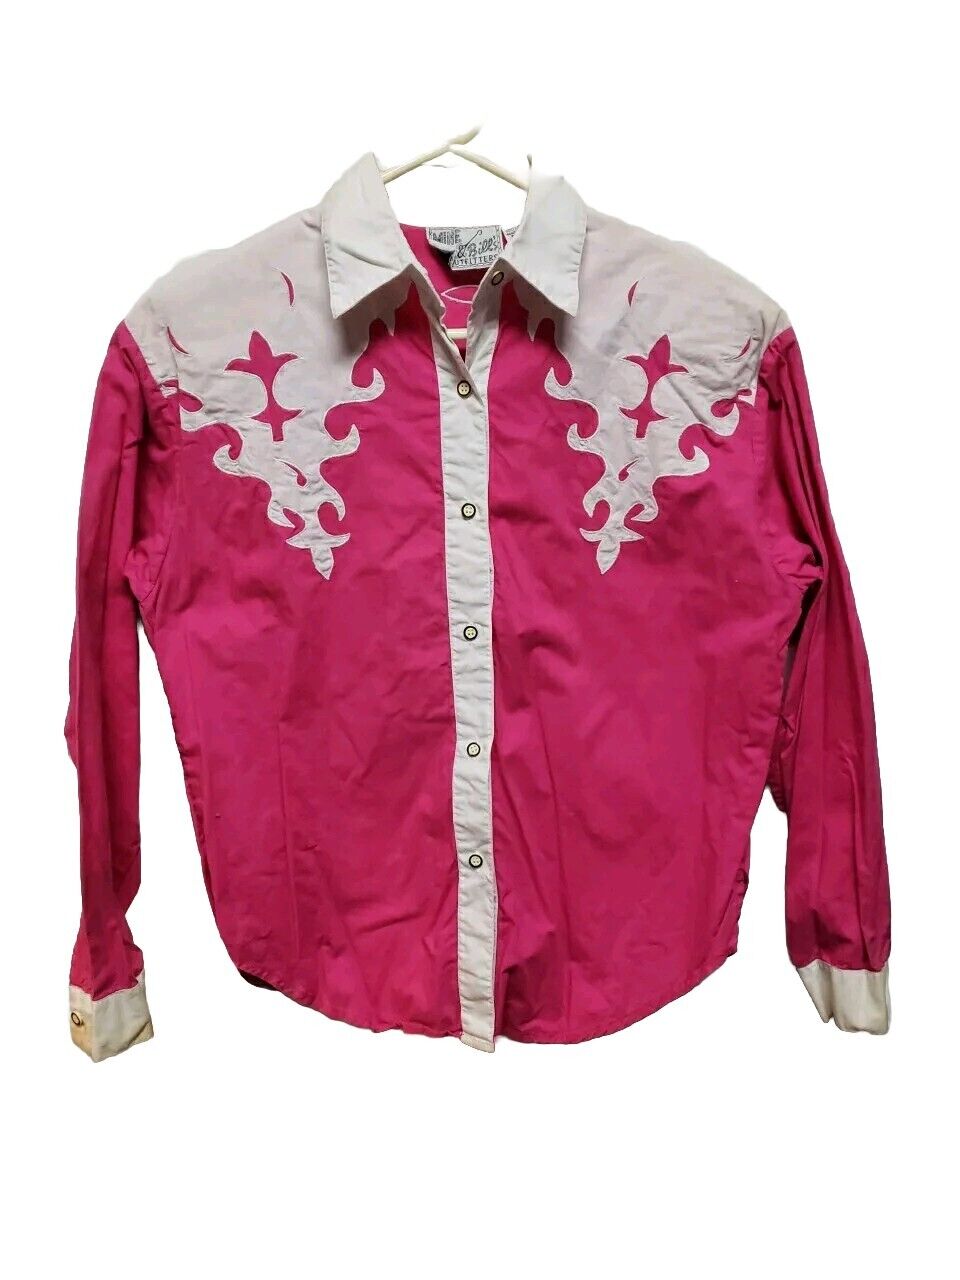 Mine And Bills Woman Western Top S Pink White Long Sleeve Vtg 90s Shoulder pads 